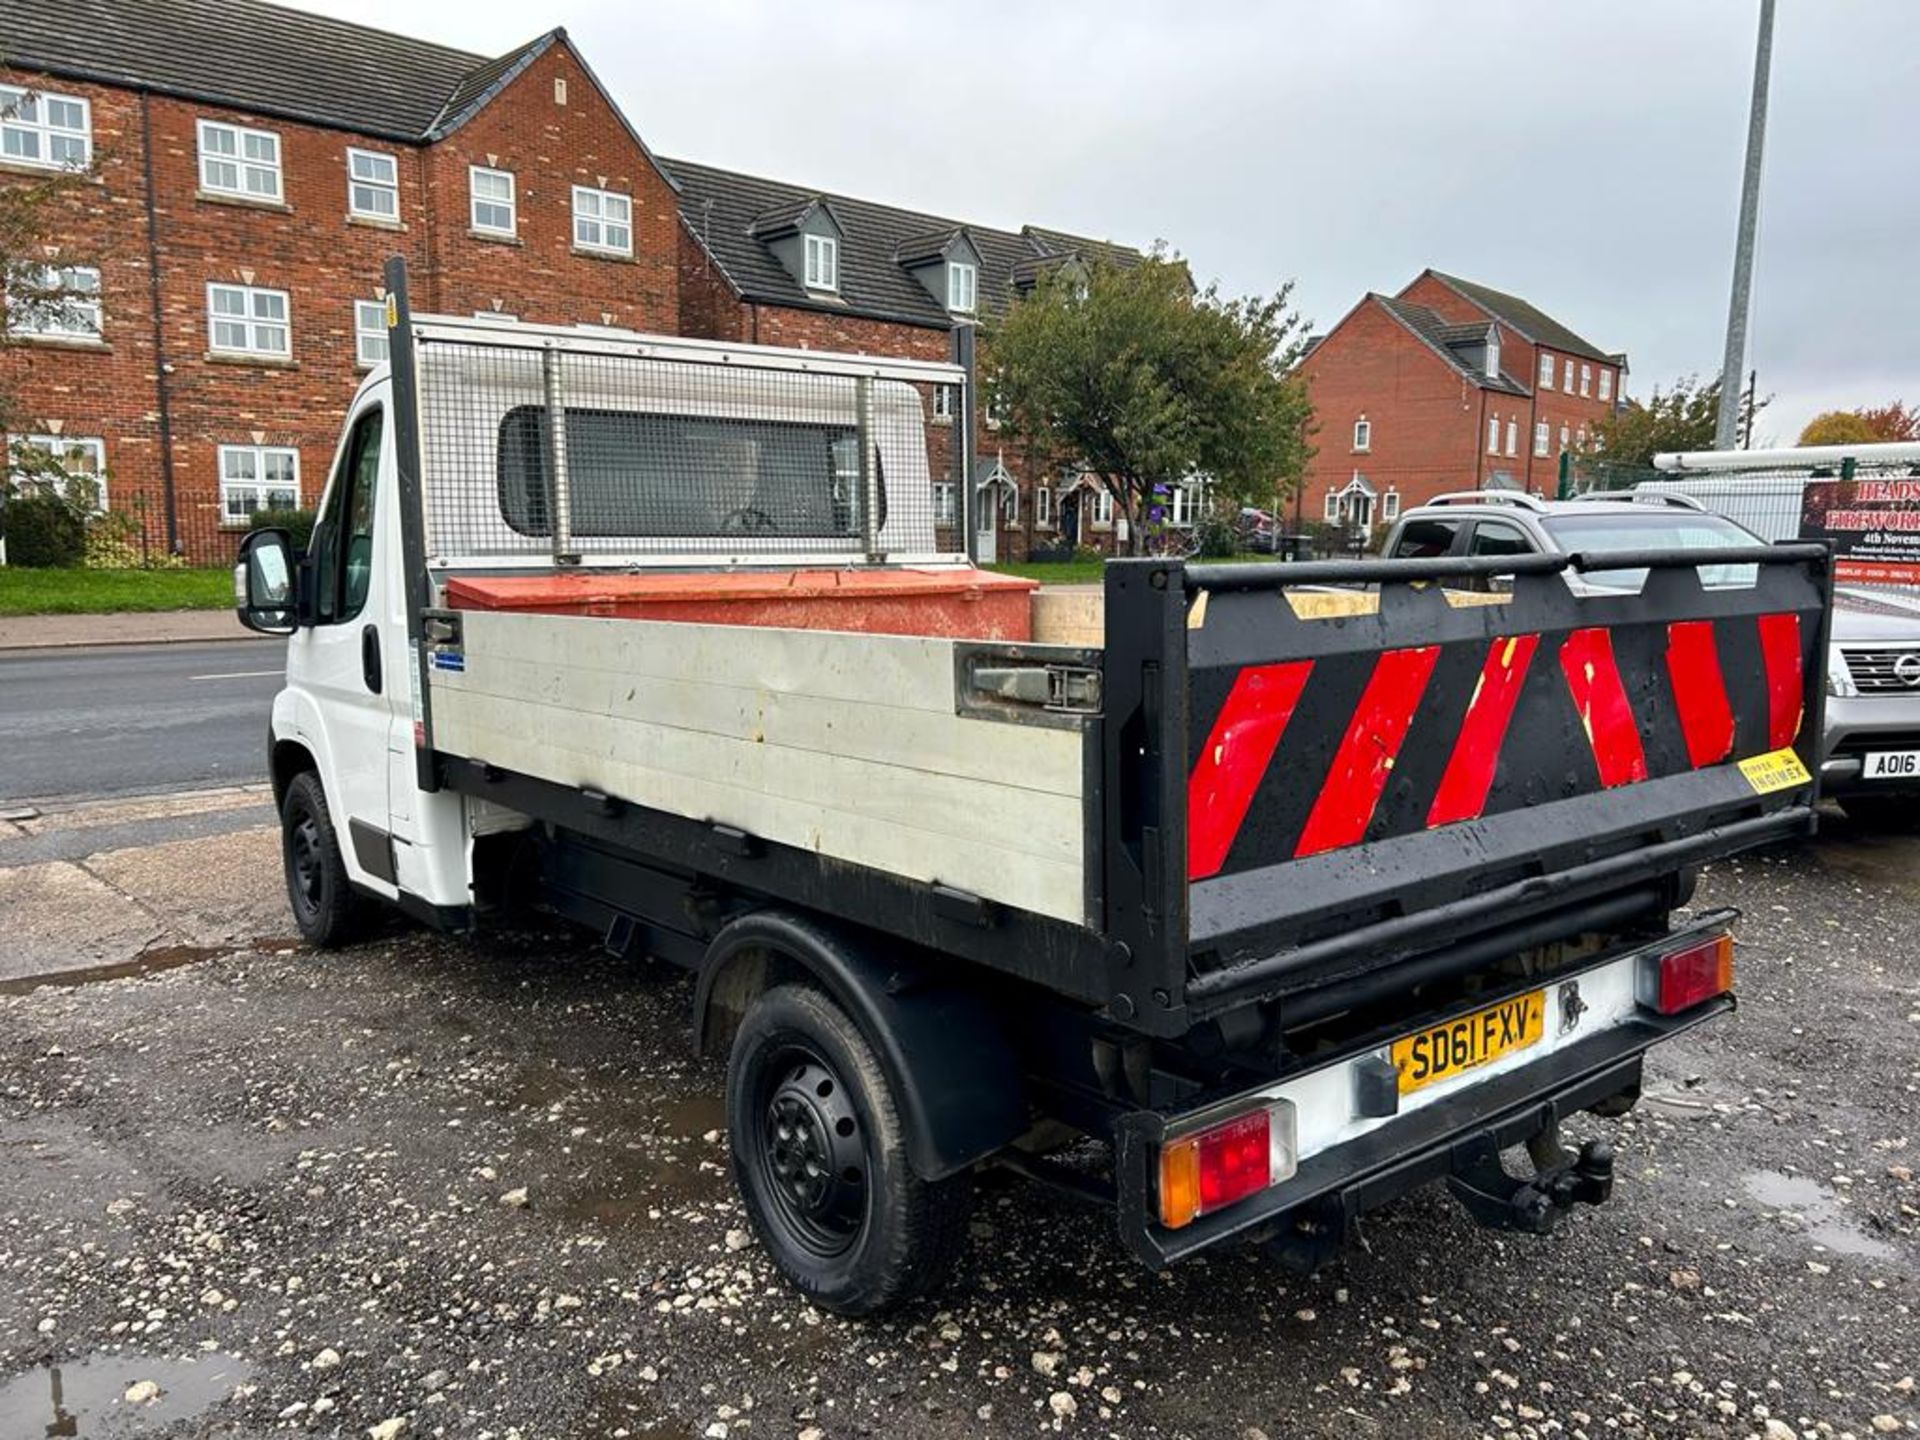 2011 PEUGEOT BOXER 335 L2 HDI WHITE CHASSIS CAB TIPPER BODY *NO VAT* - Image 6 of 16